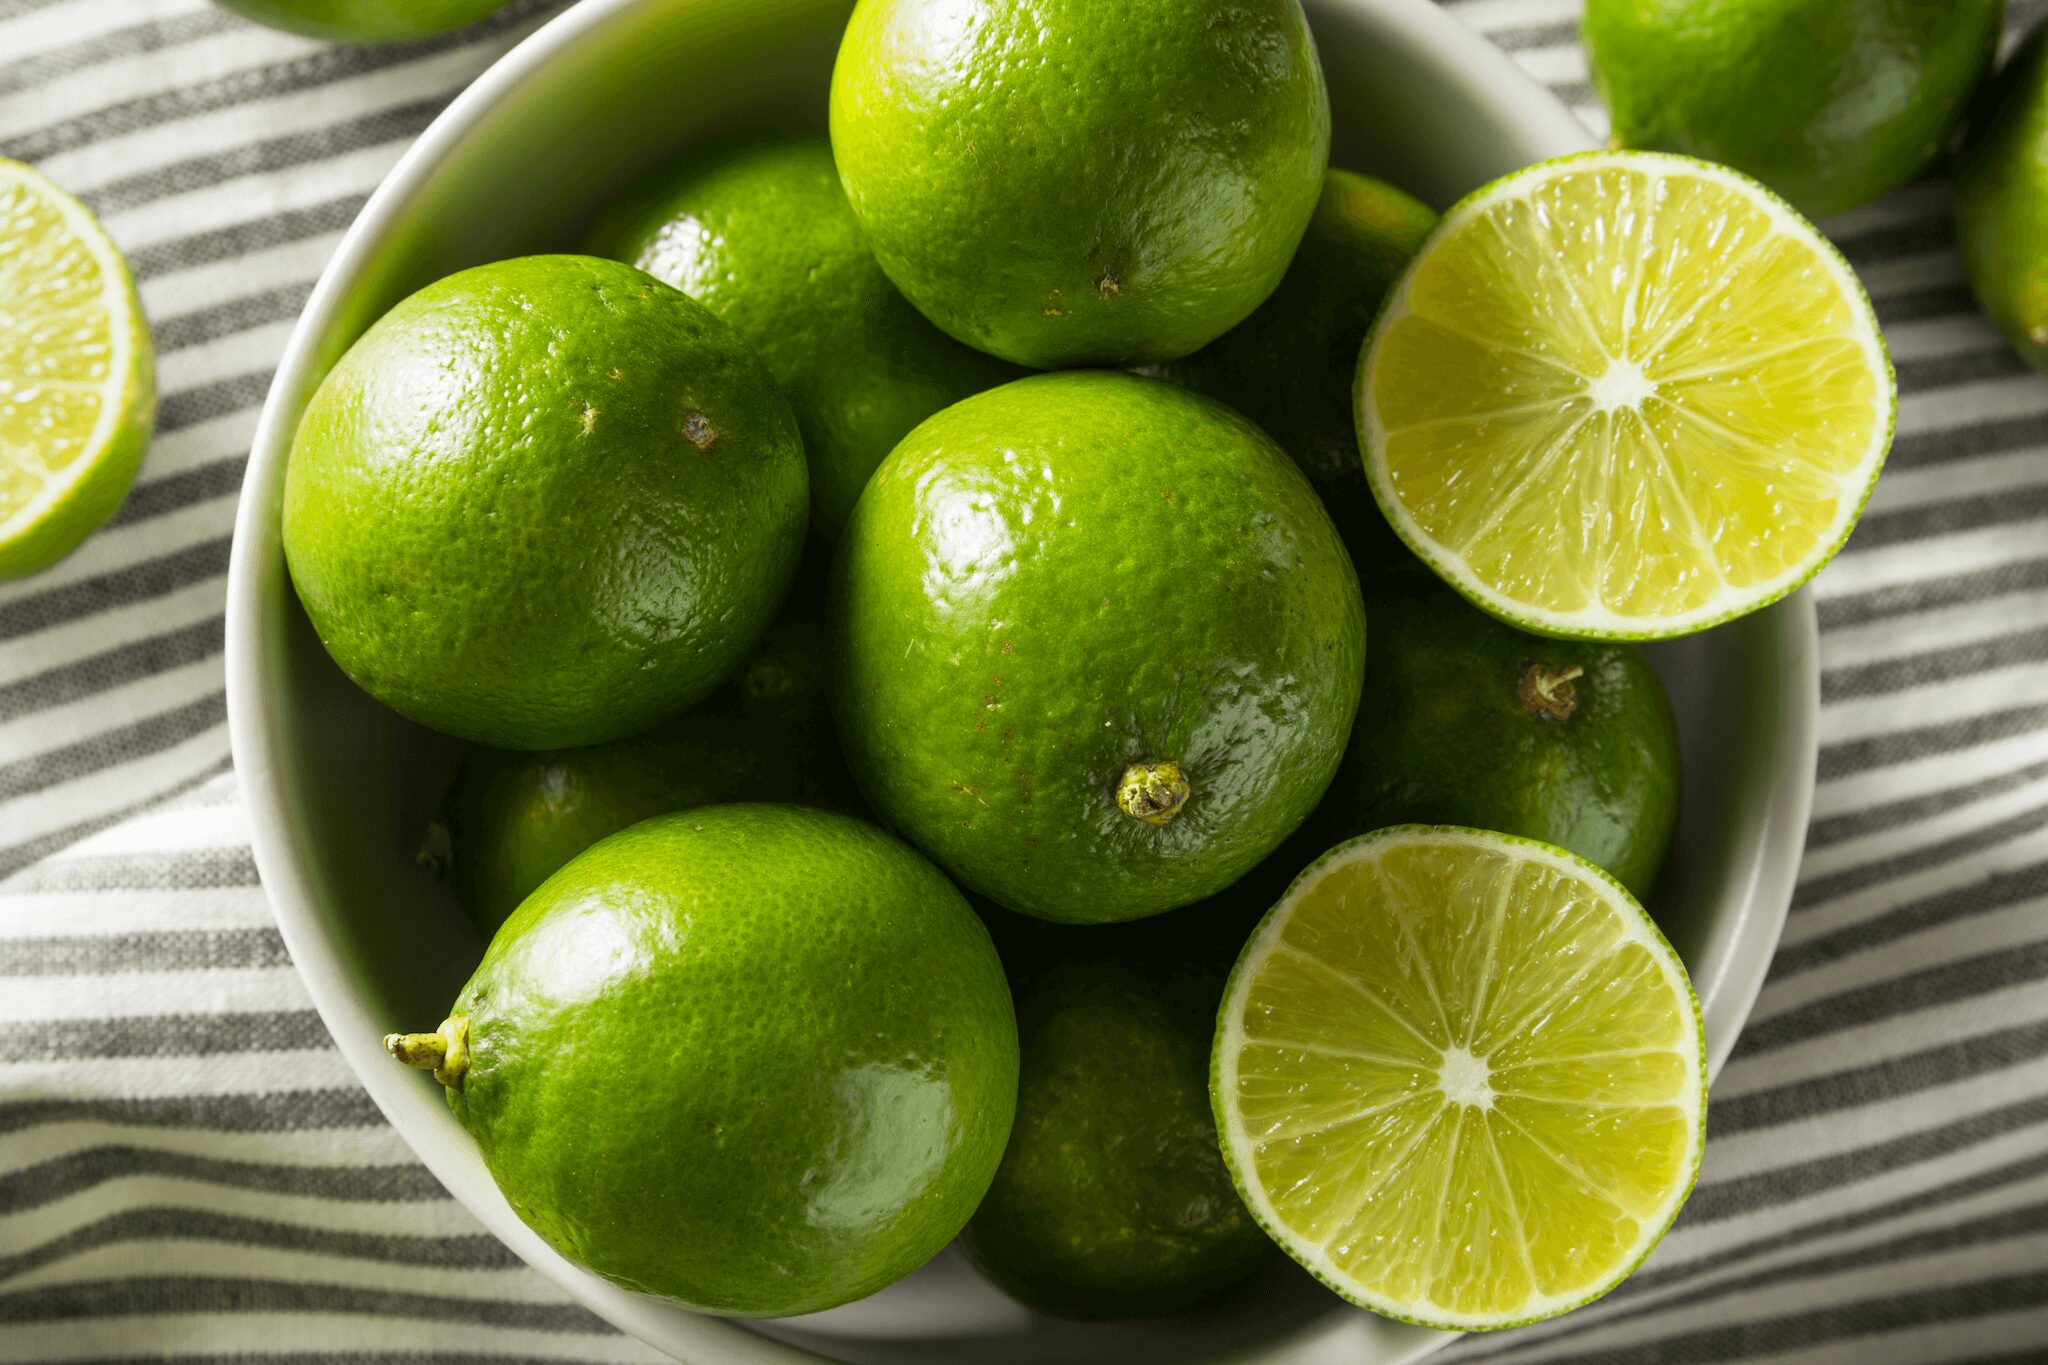 what are the health benefits of limes